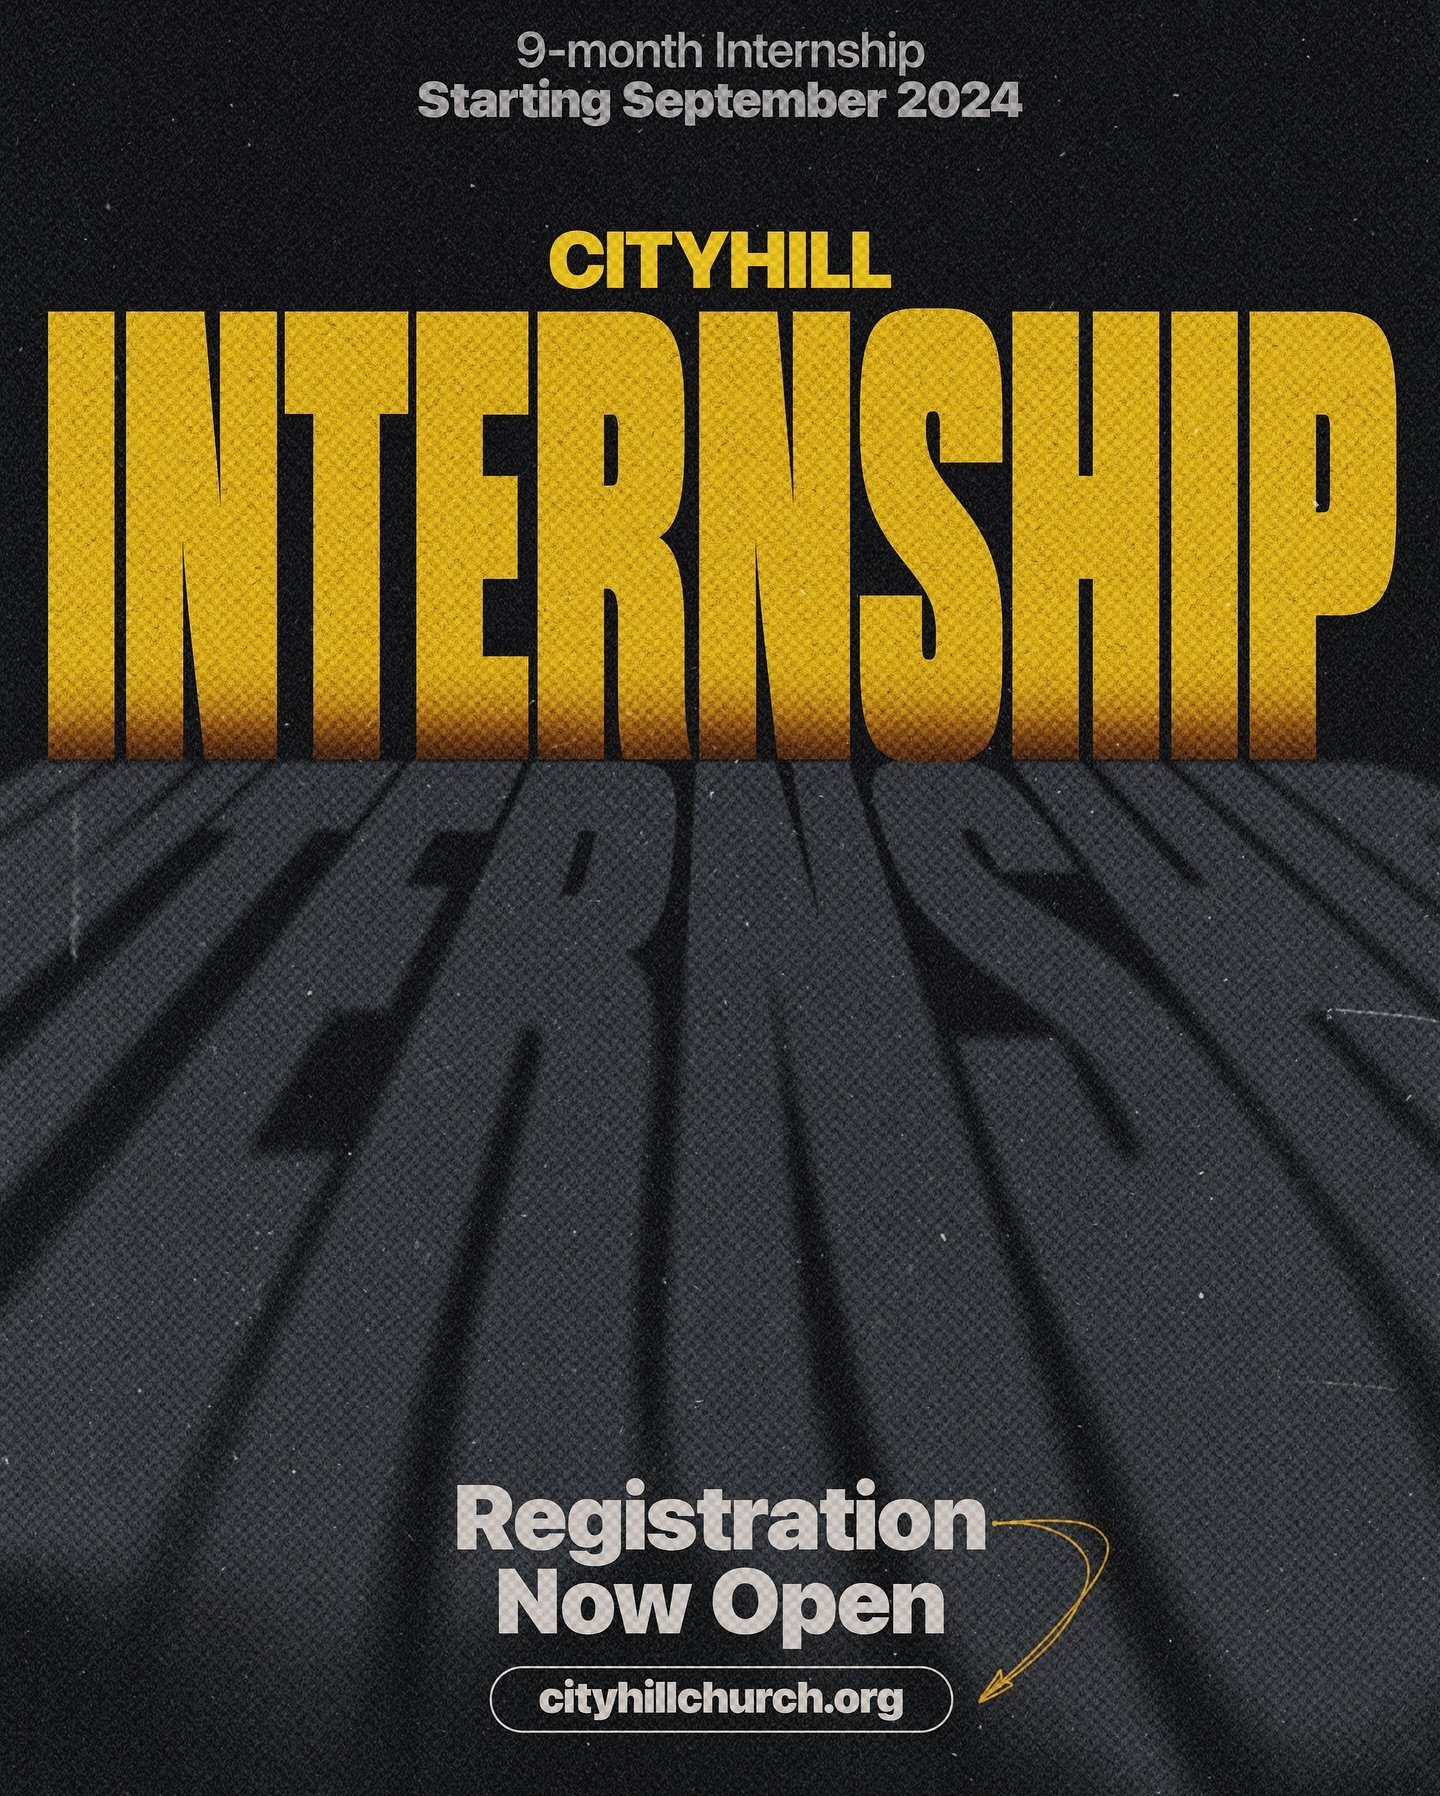 CityHill Internship registration is still open! If you or someone you know is excited about dedicating 9 months to ministry, you don&rsquo;t want to miss out on this opportunity. Visit cityhillchurch.org/cityhill-internship for more information